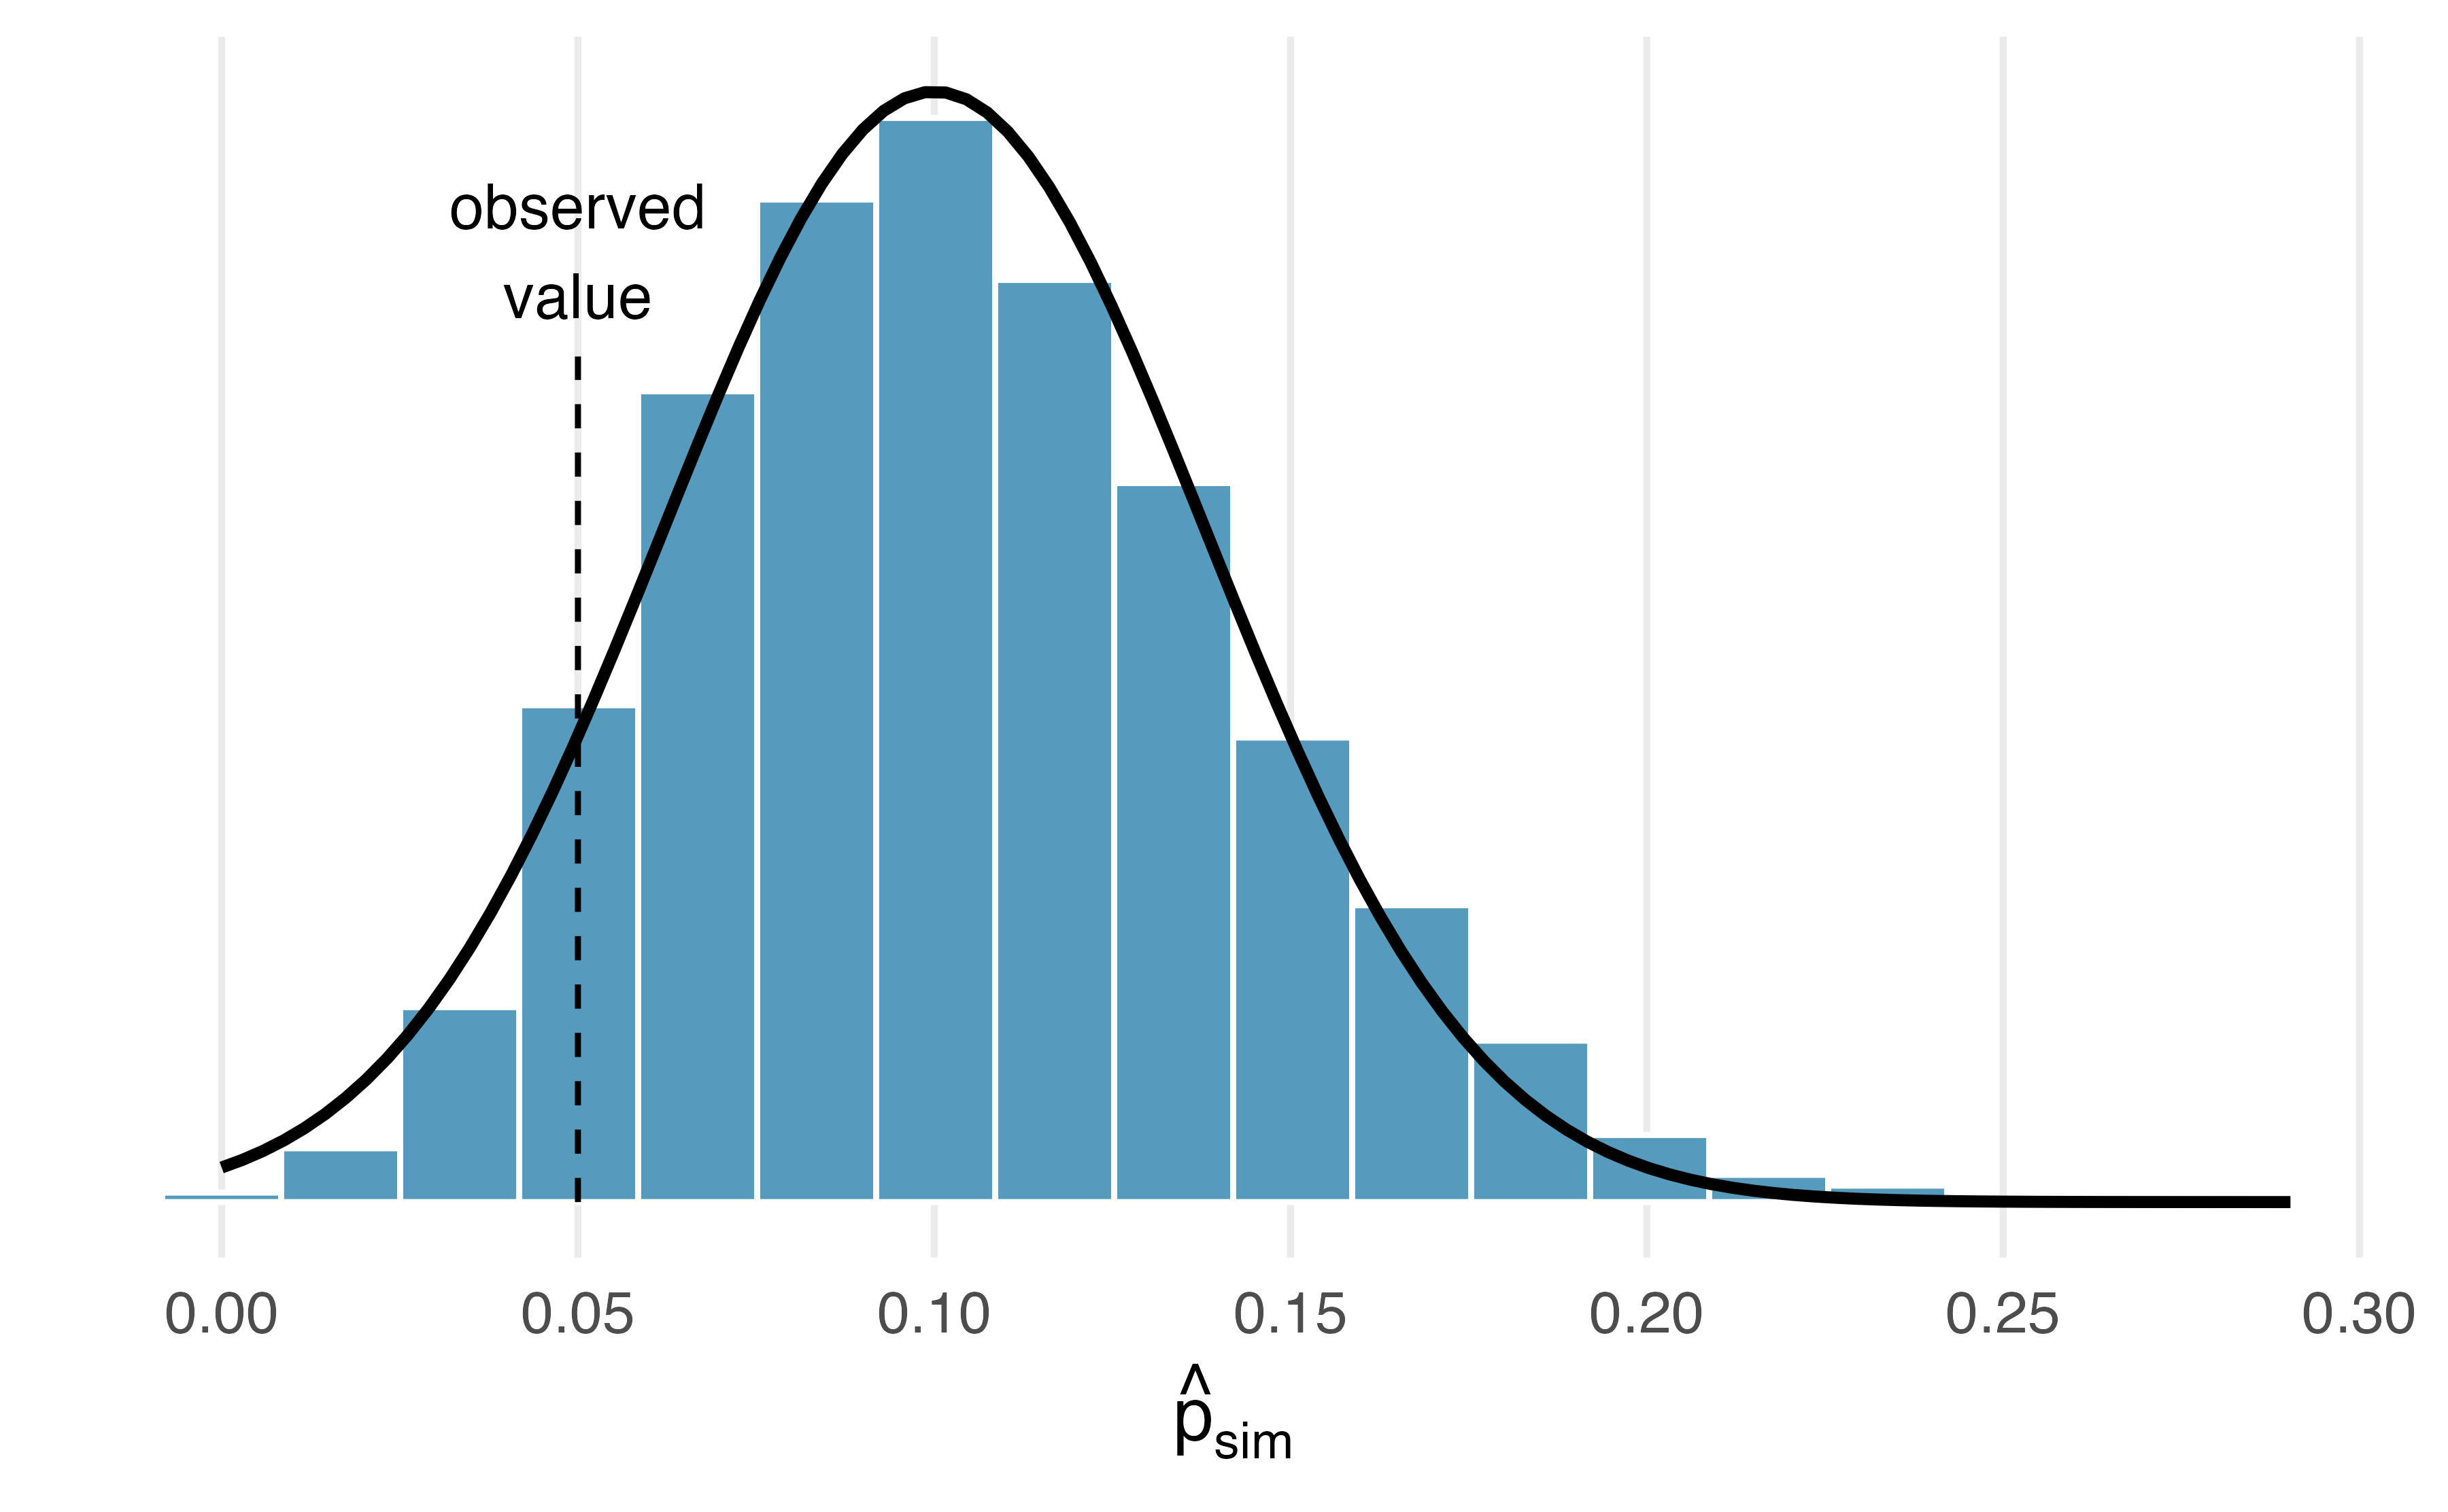 Normal curve overlaid on the histogram of the simulated sample proportions in the medical consultant study.  The theoretical normal distribution does not fit the histogram as well as in @fig-OpportunityCostDiffs-w-normal due to the skewness of the distribution of the sample proportions. The observed sample proportion of 0.0484 is towards the tail in both the normal curve and the histogram, but it is not an extreme value.